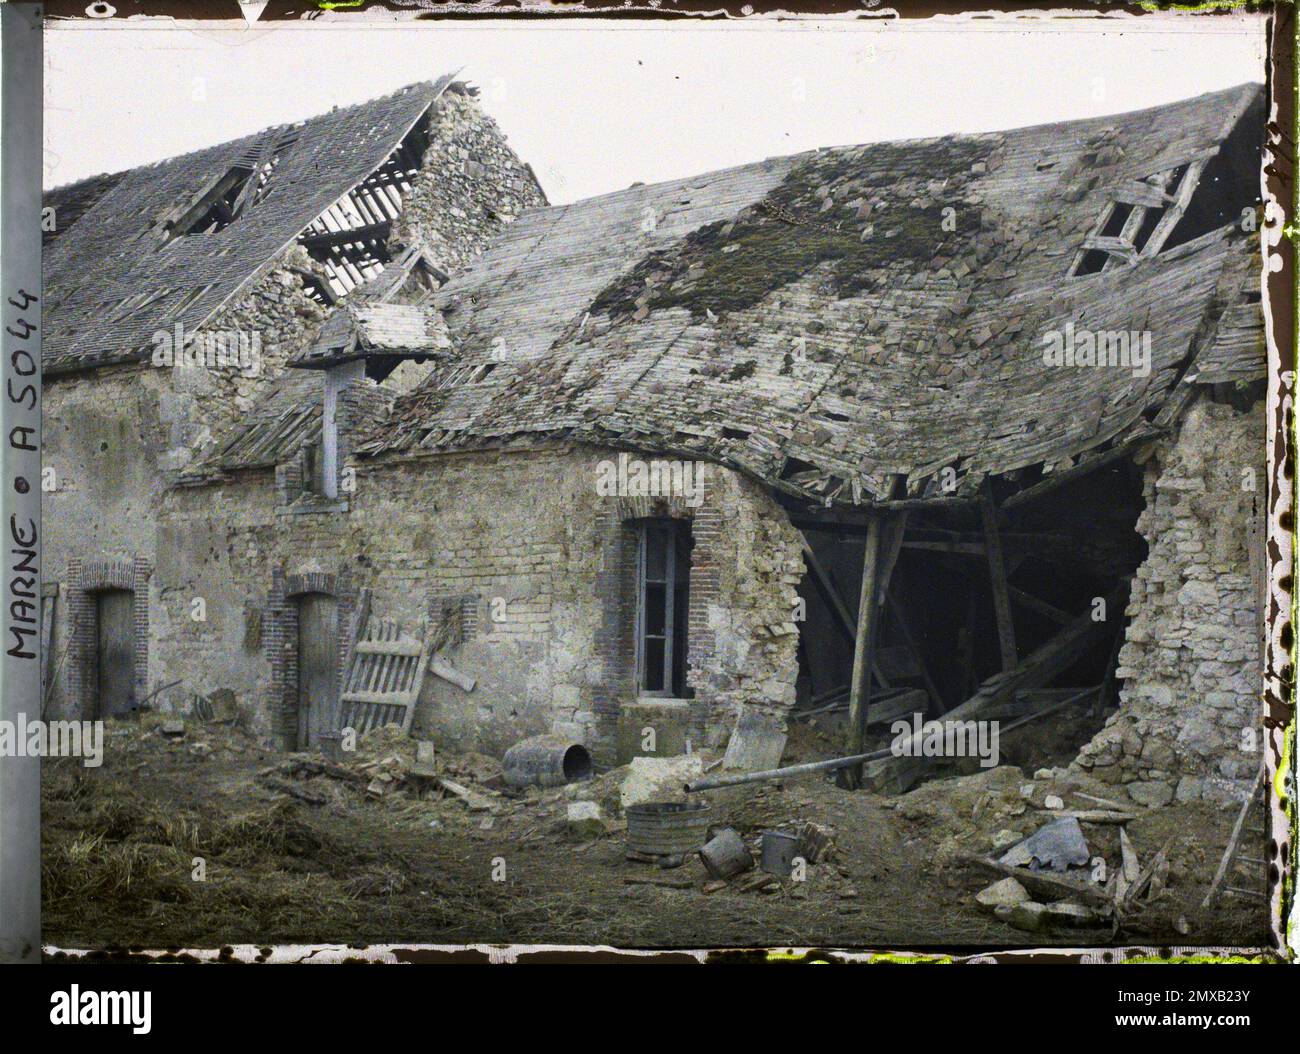 REURS, Marne, France The House destroyed by Emile Gibard , 1914-1915 - Devastated zones, North and East of France - Jean Brunhes, Auguste Léon and Georges Chevalier - (December 1914 -April 1915) Stock Photo